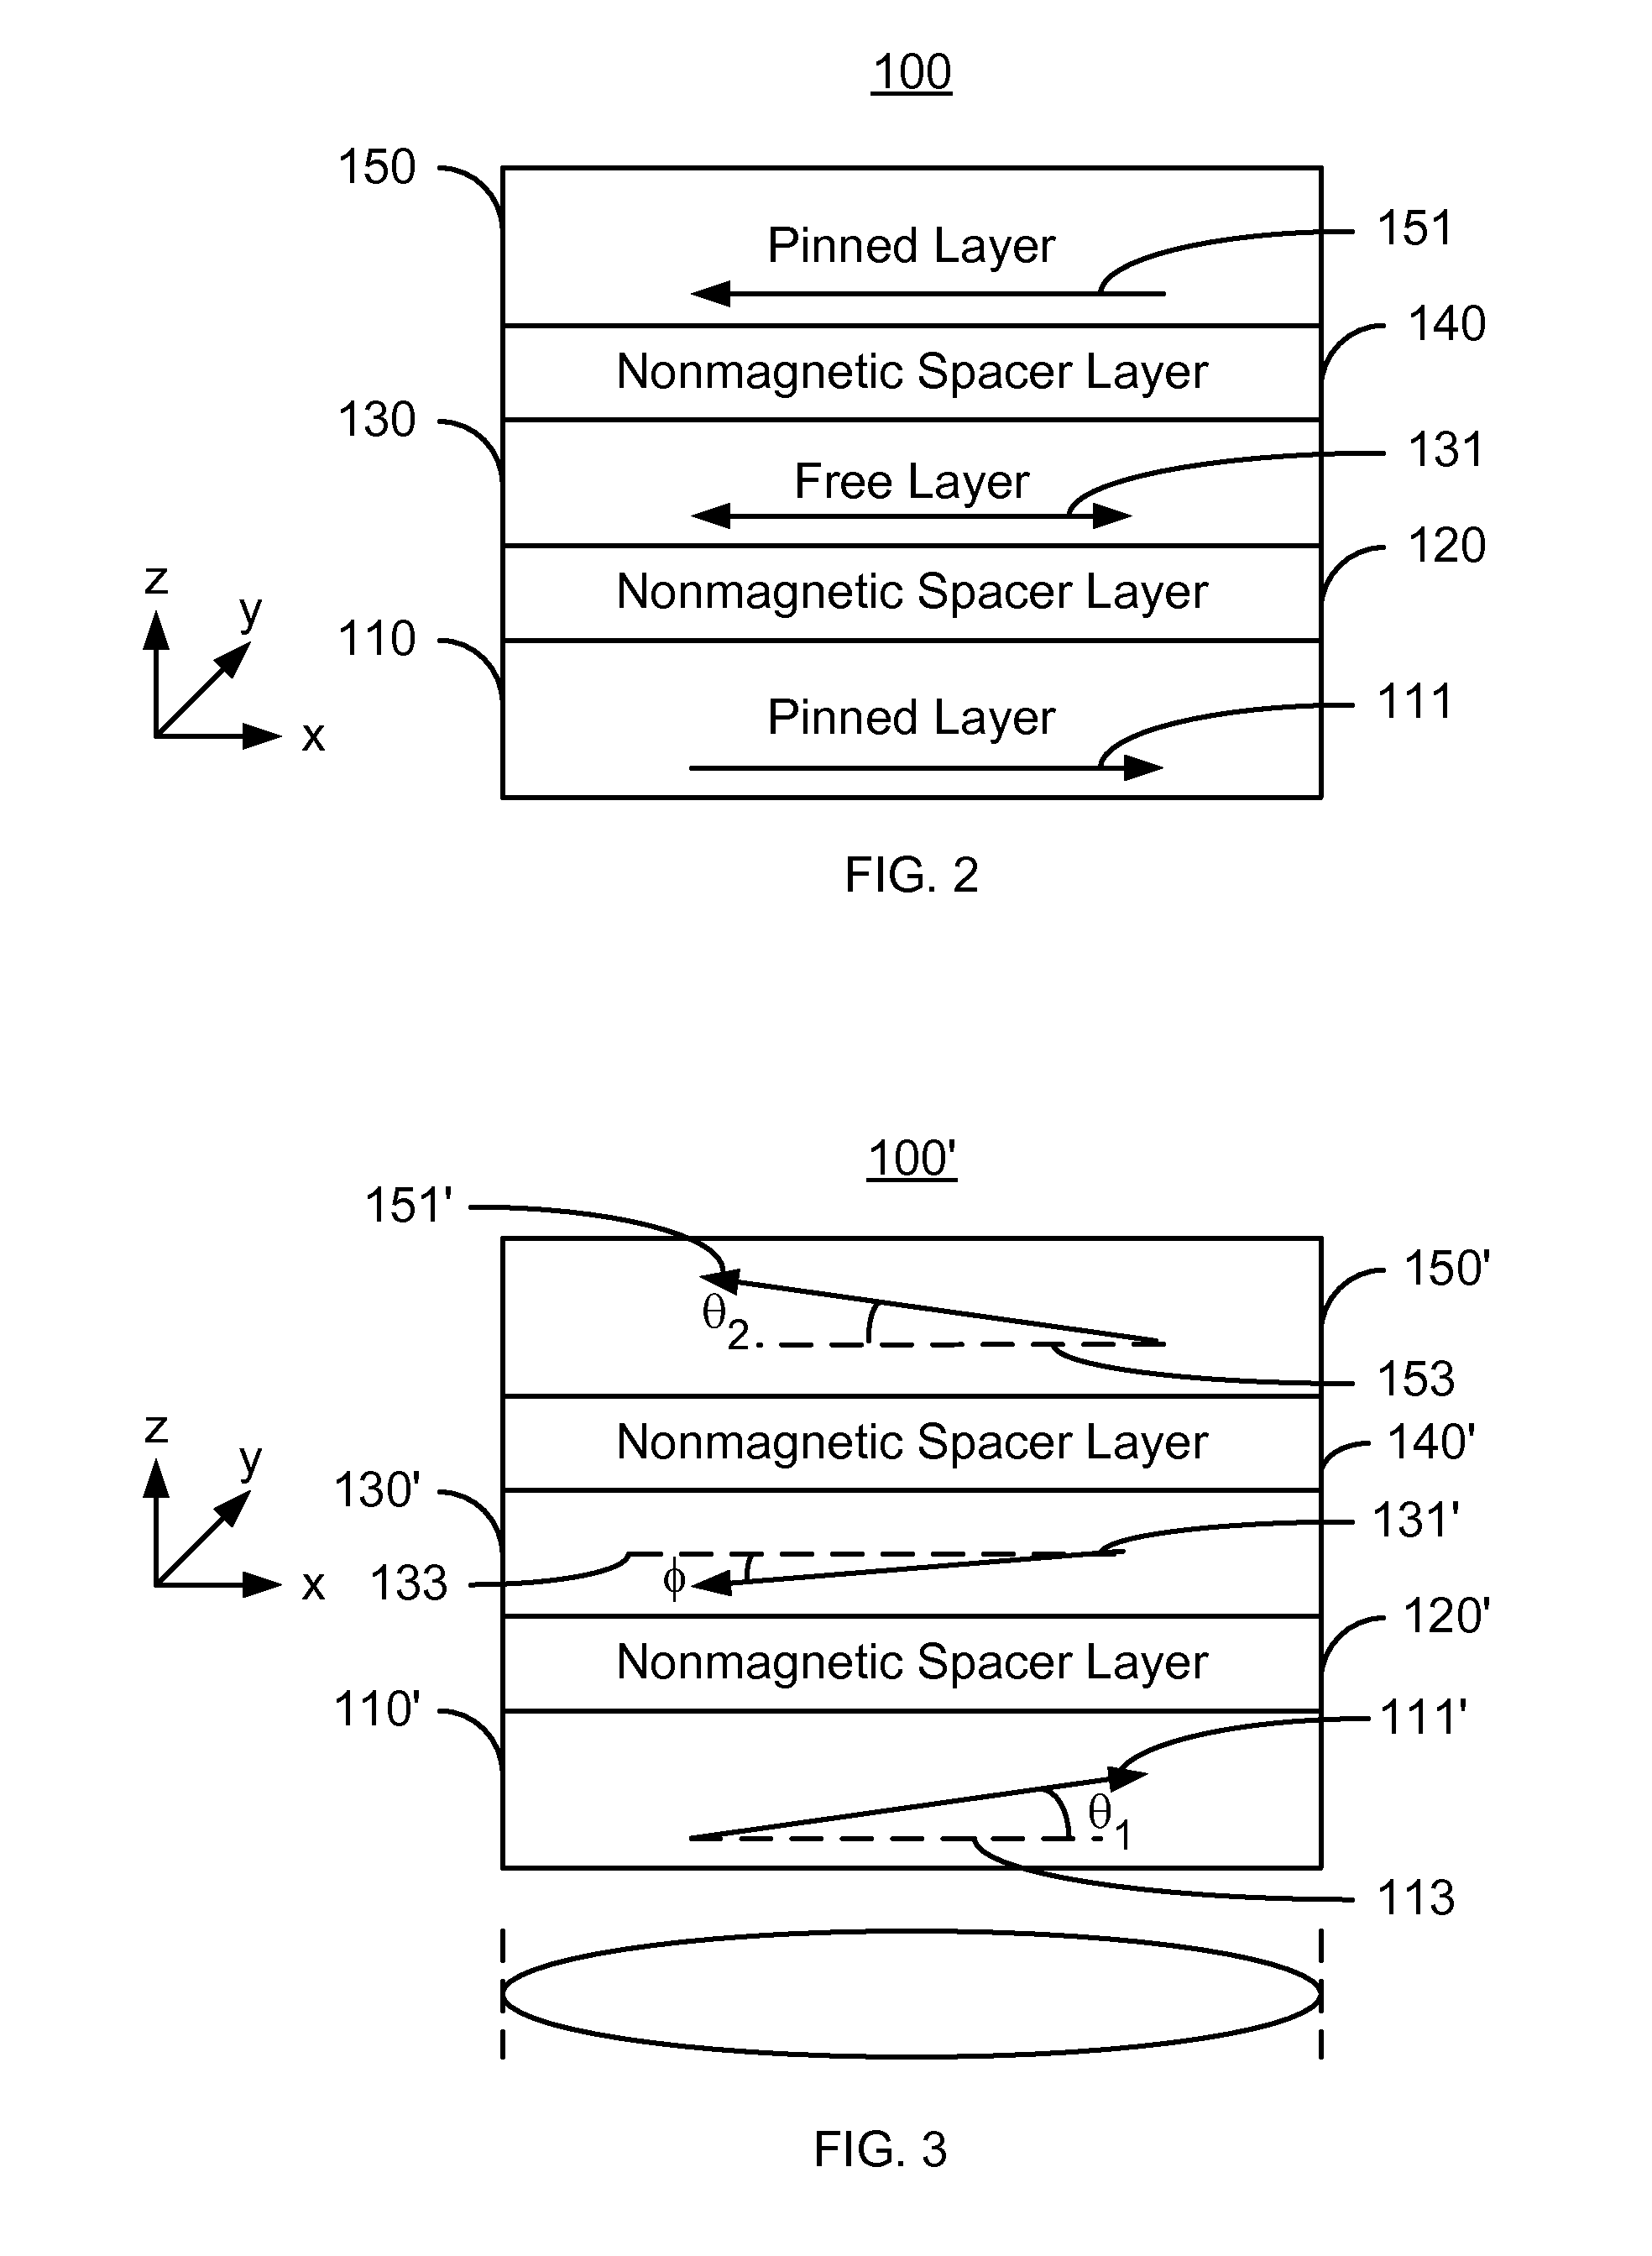 Method and system for providing dual magnetic tunneling junctions usable in spin transfer torque magnetic memories